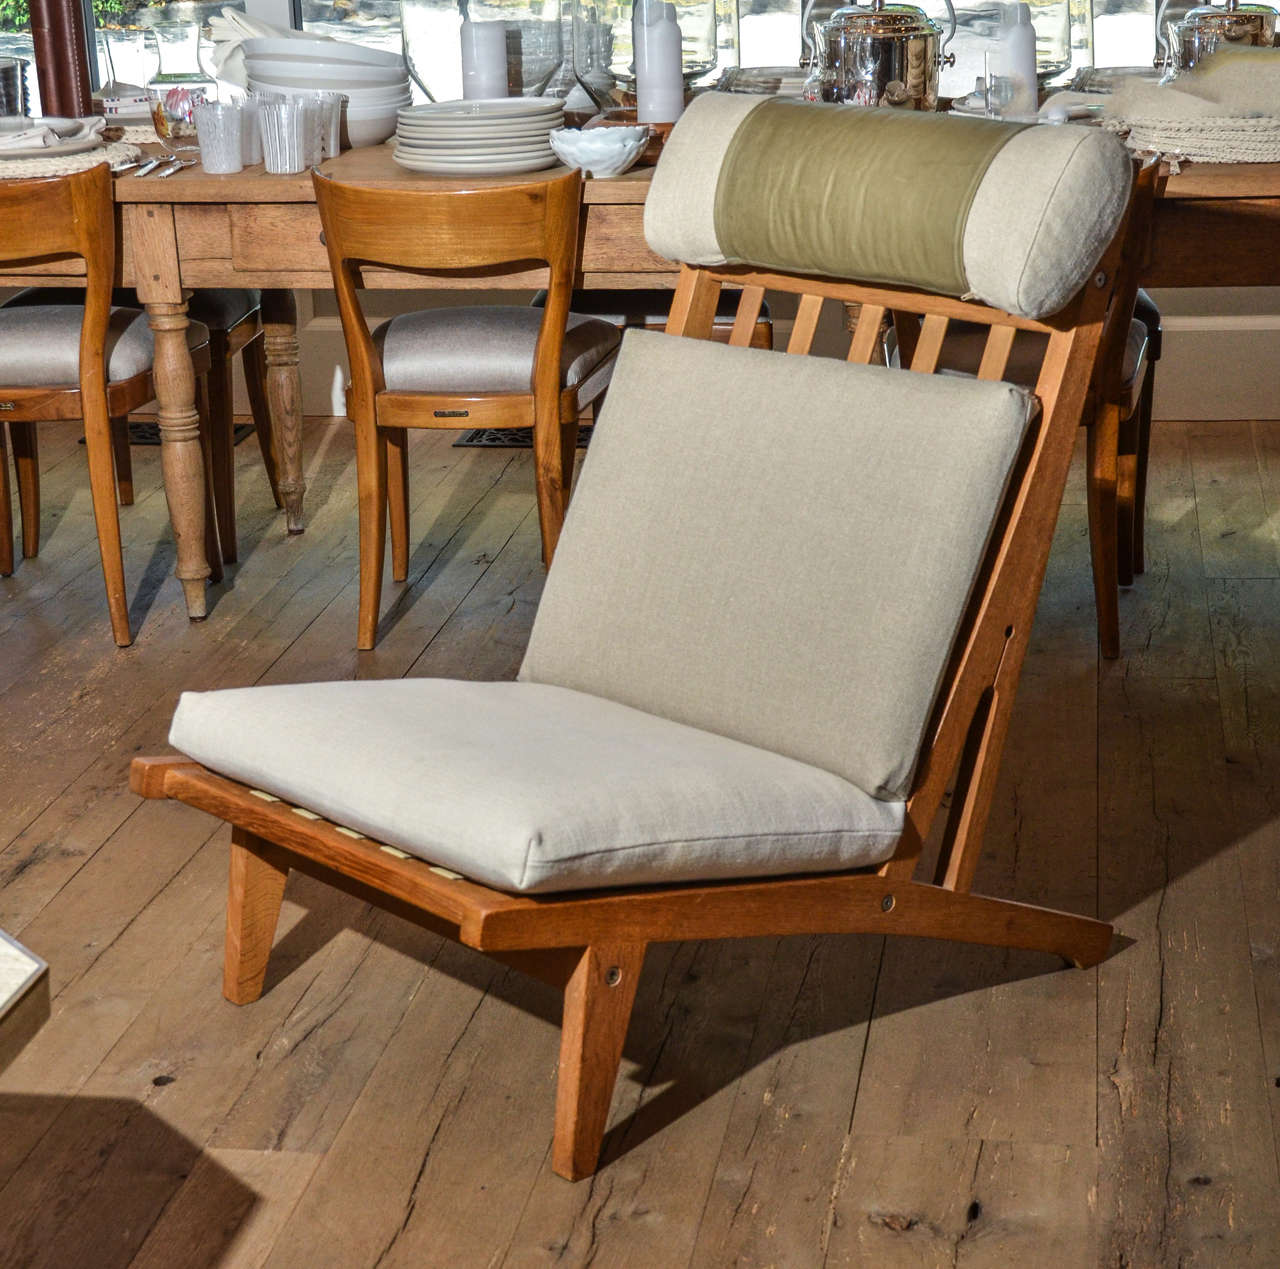 Stunning Mid-Century Danish deck chairs by Hans Wegner, newly re-upholstered in linen cotton blend in Ecru and Flax with olive leather detail.